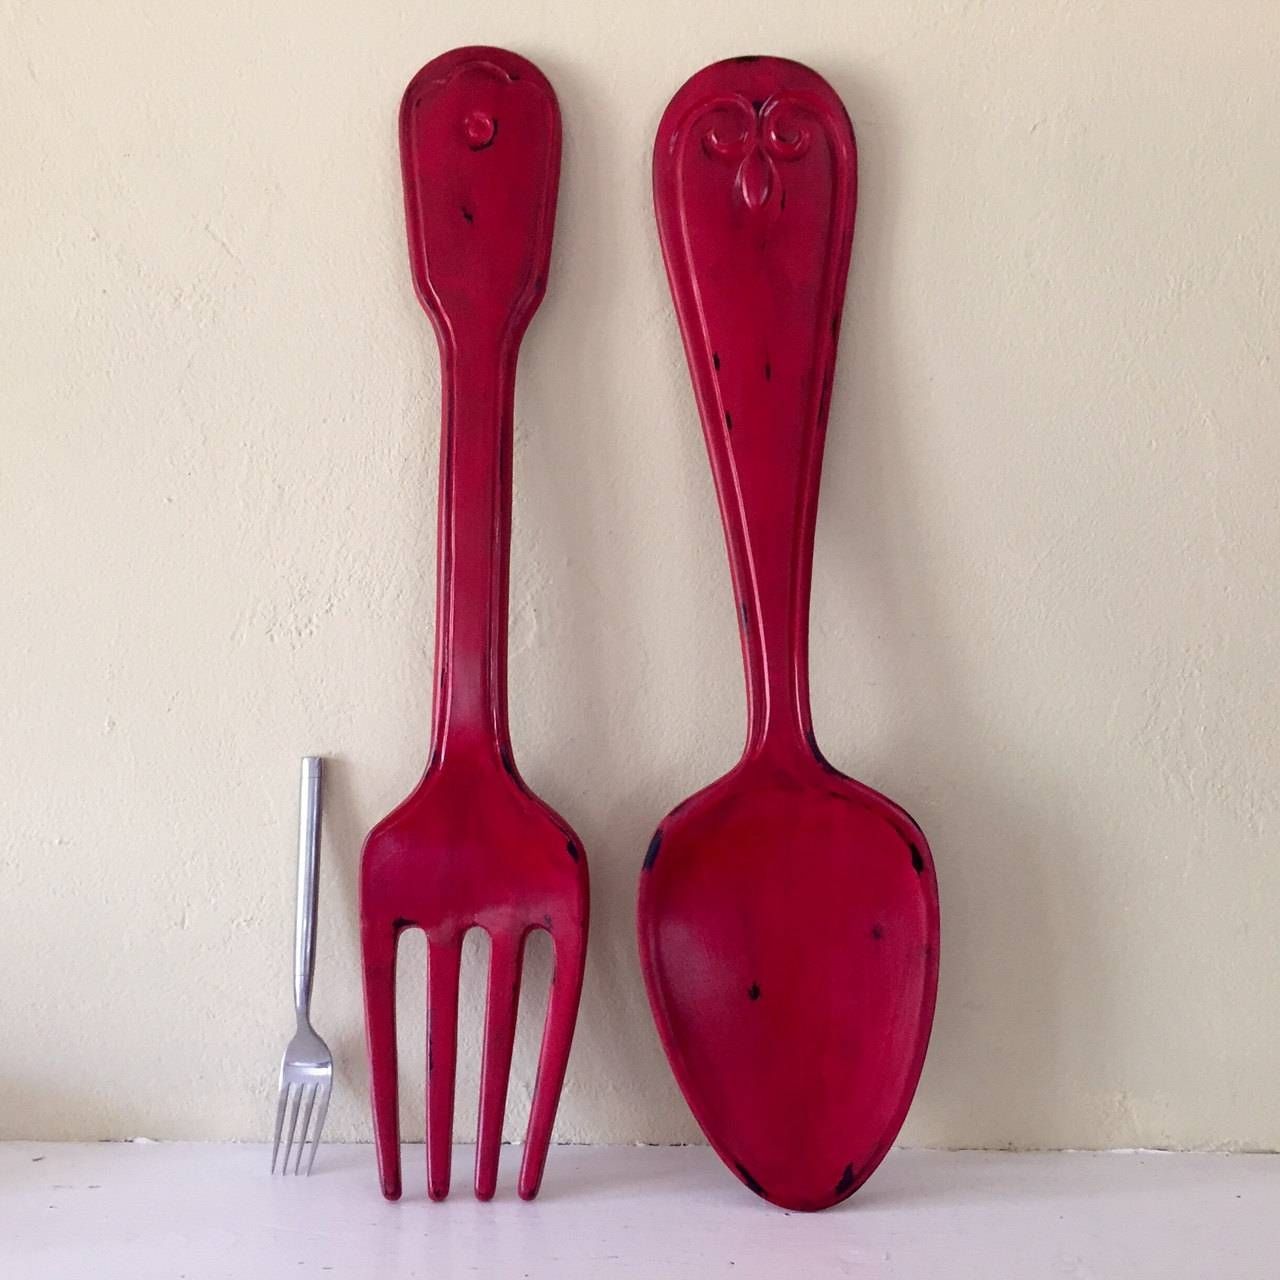 Oversized Wooden Spoon And Fork Wall Decor : Oversized Spoon And With 2017 Big Spoon And Fork Wall Decor (Gallery 23 of 30)